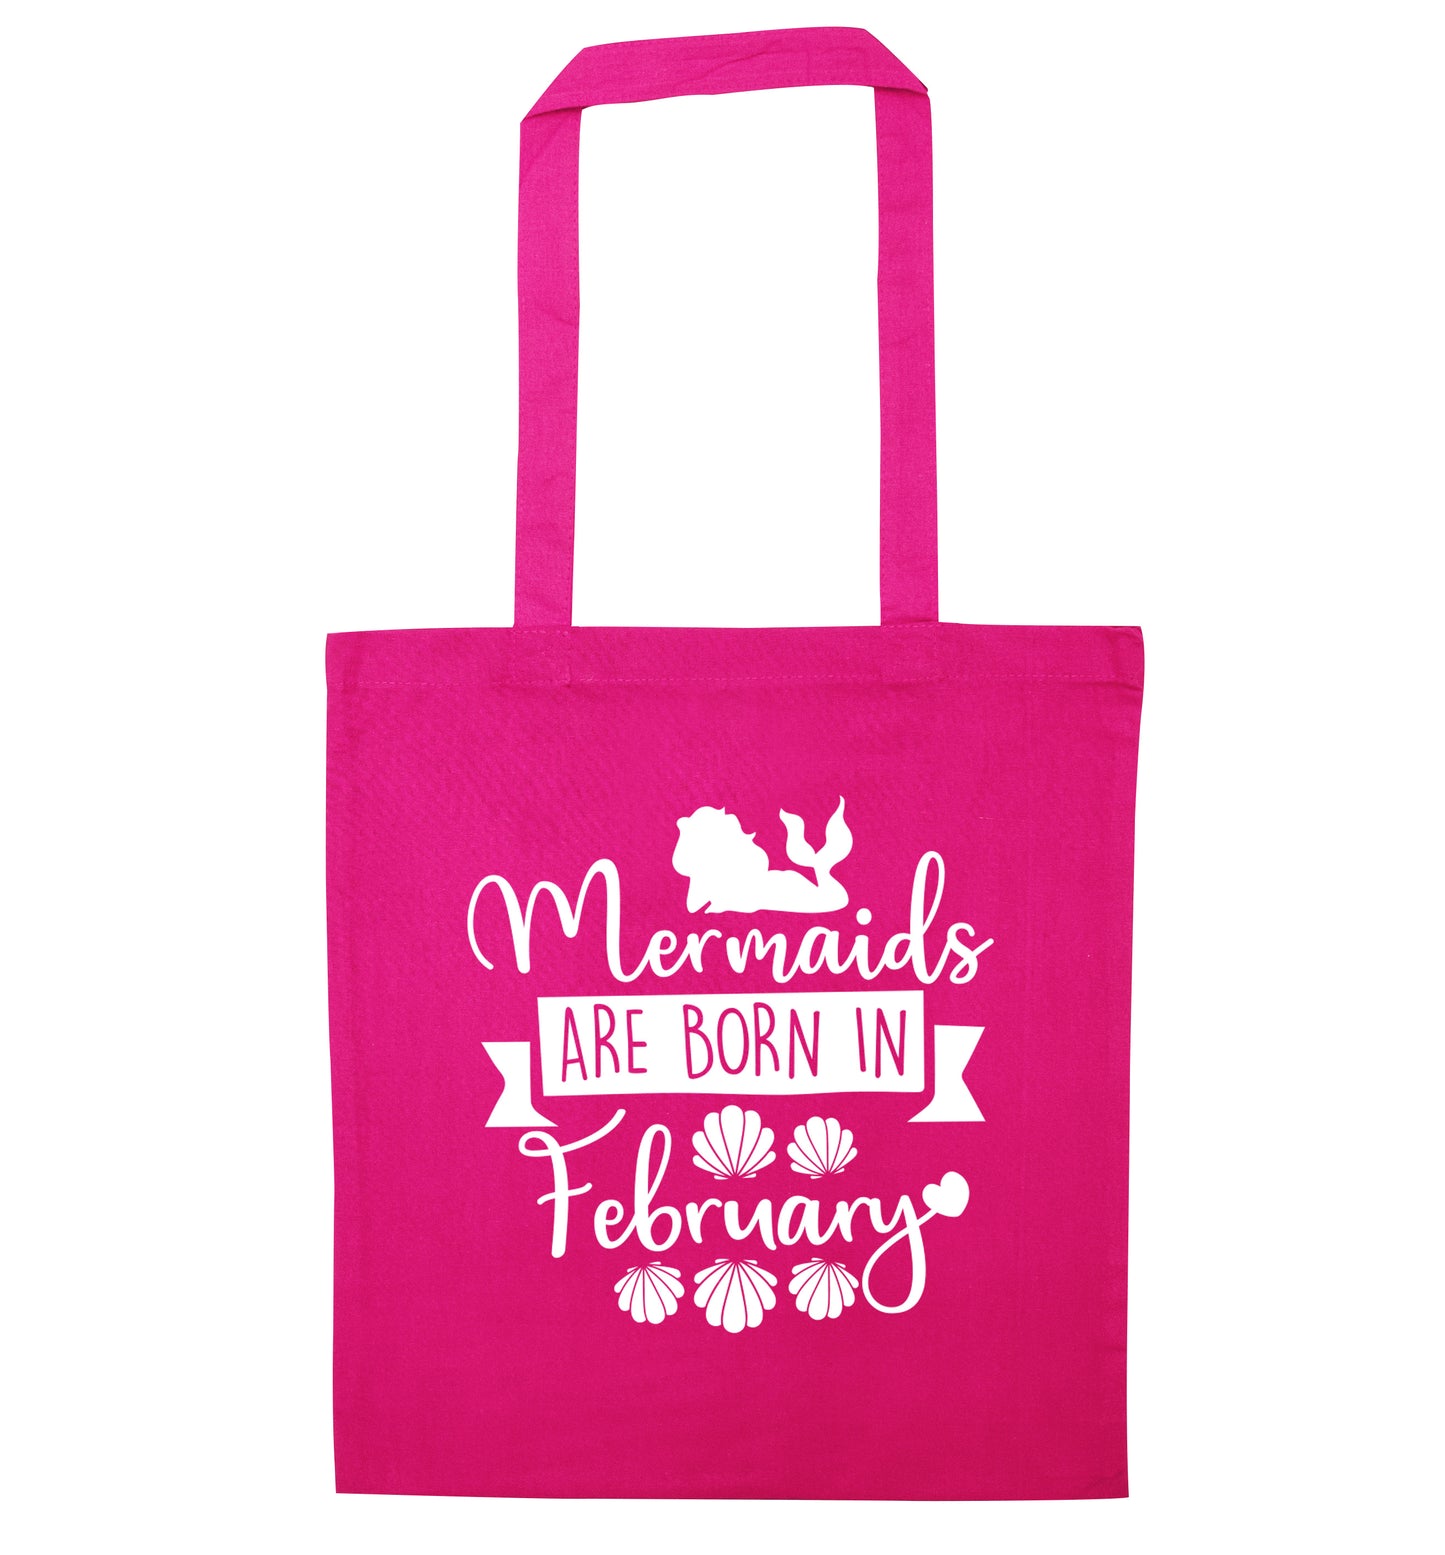 Mermaids are born in February pink tote bag